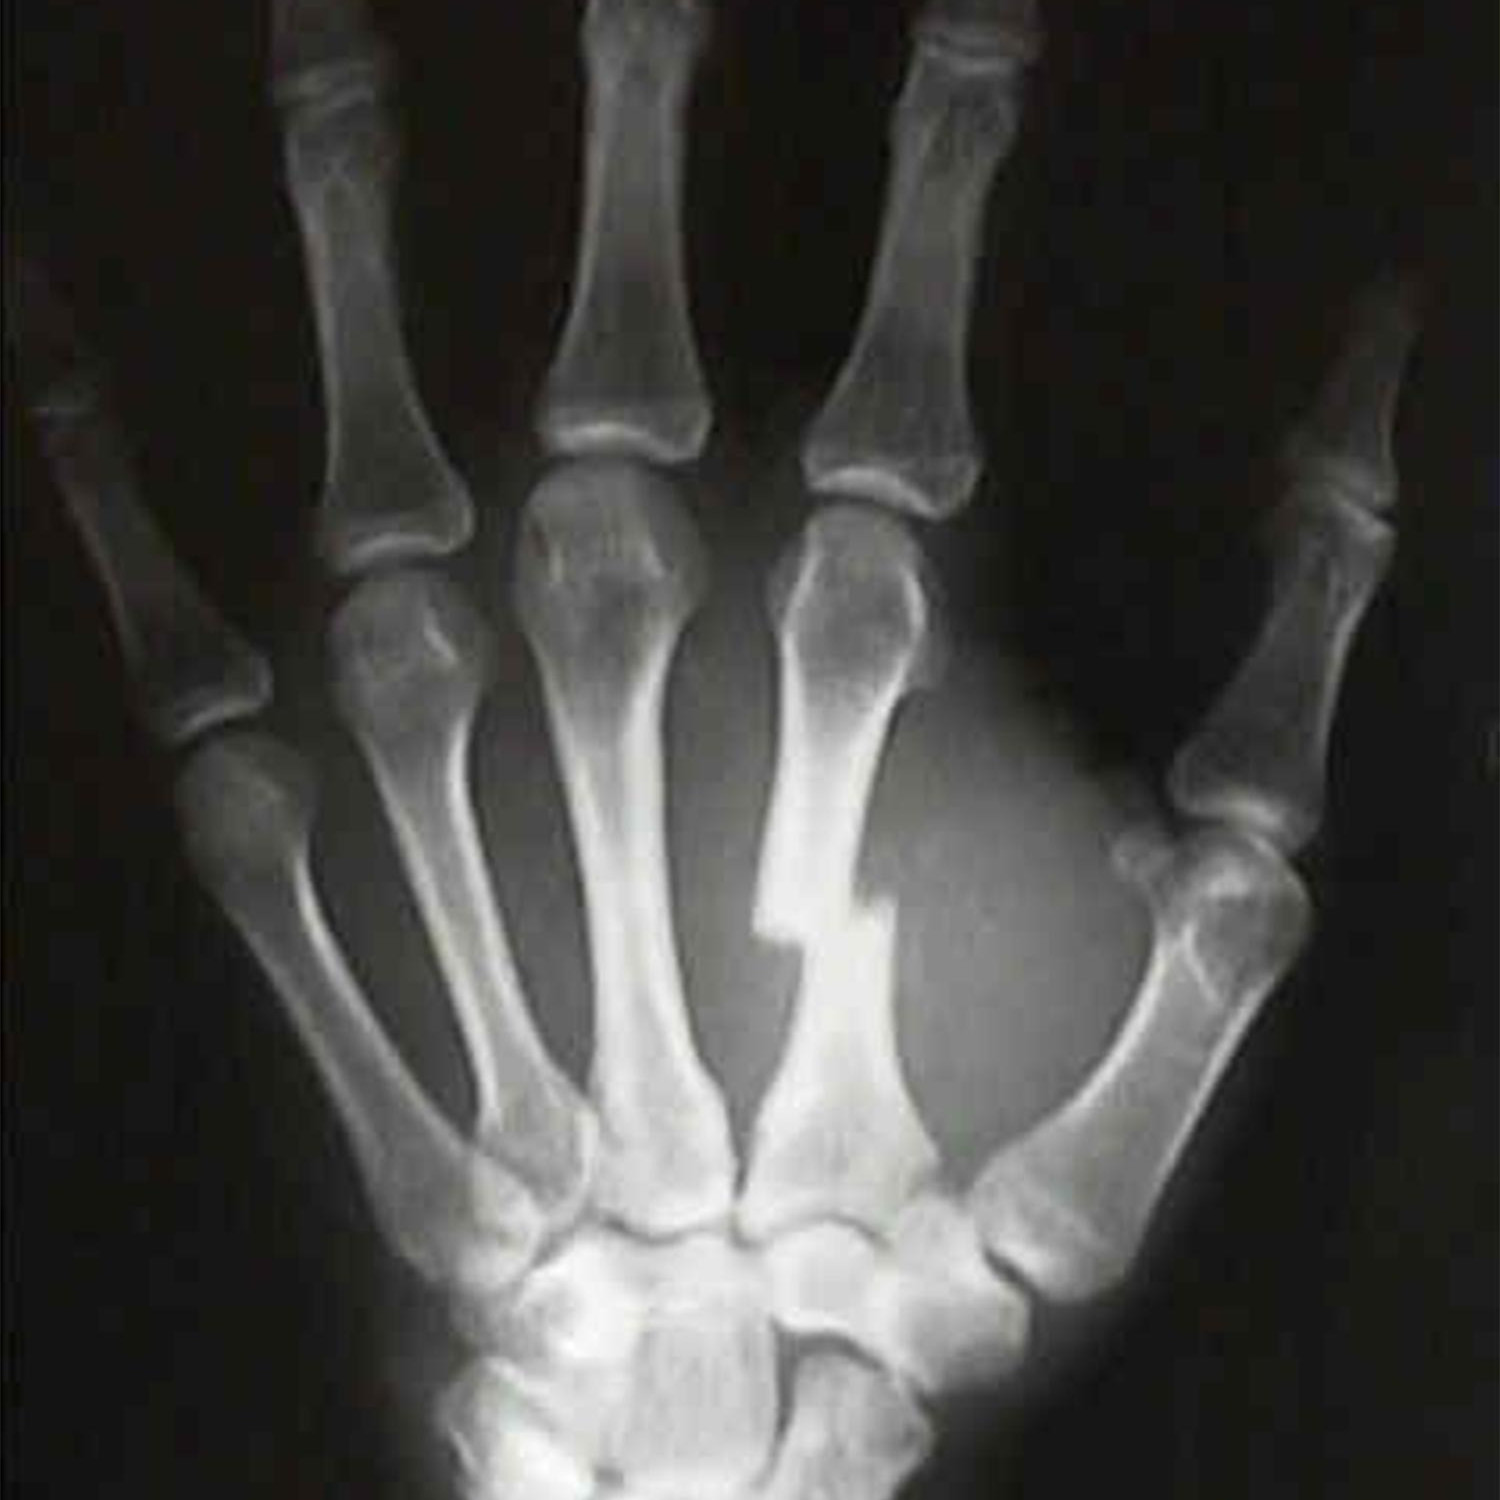 Do you know how to fix a metacarpal fracture?